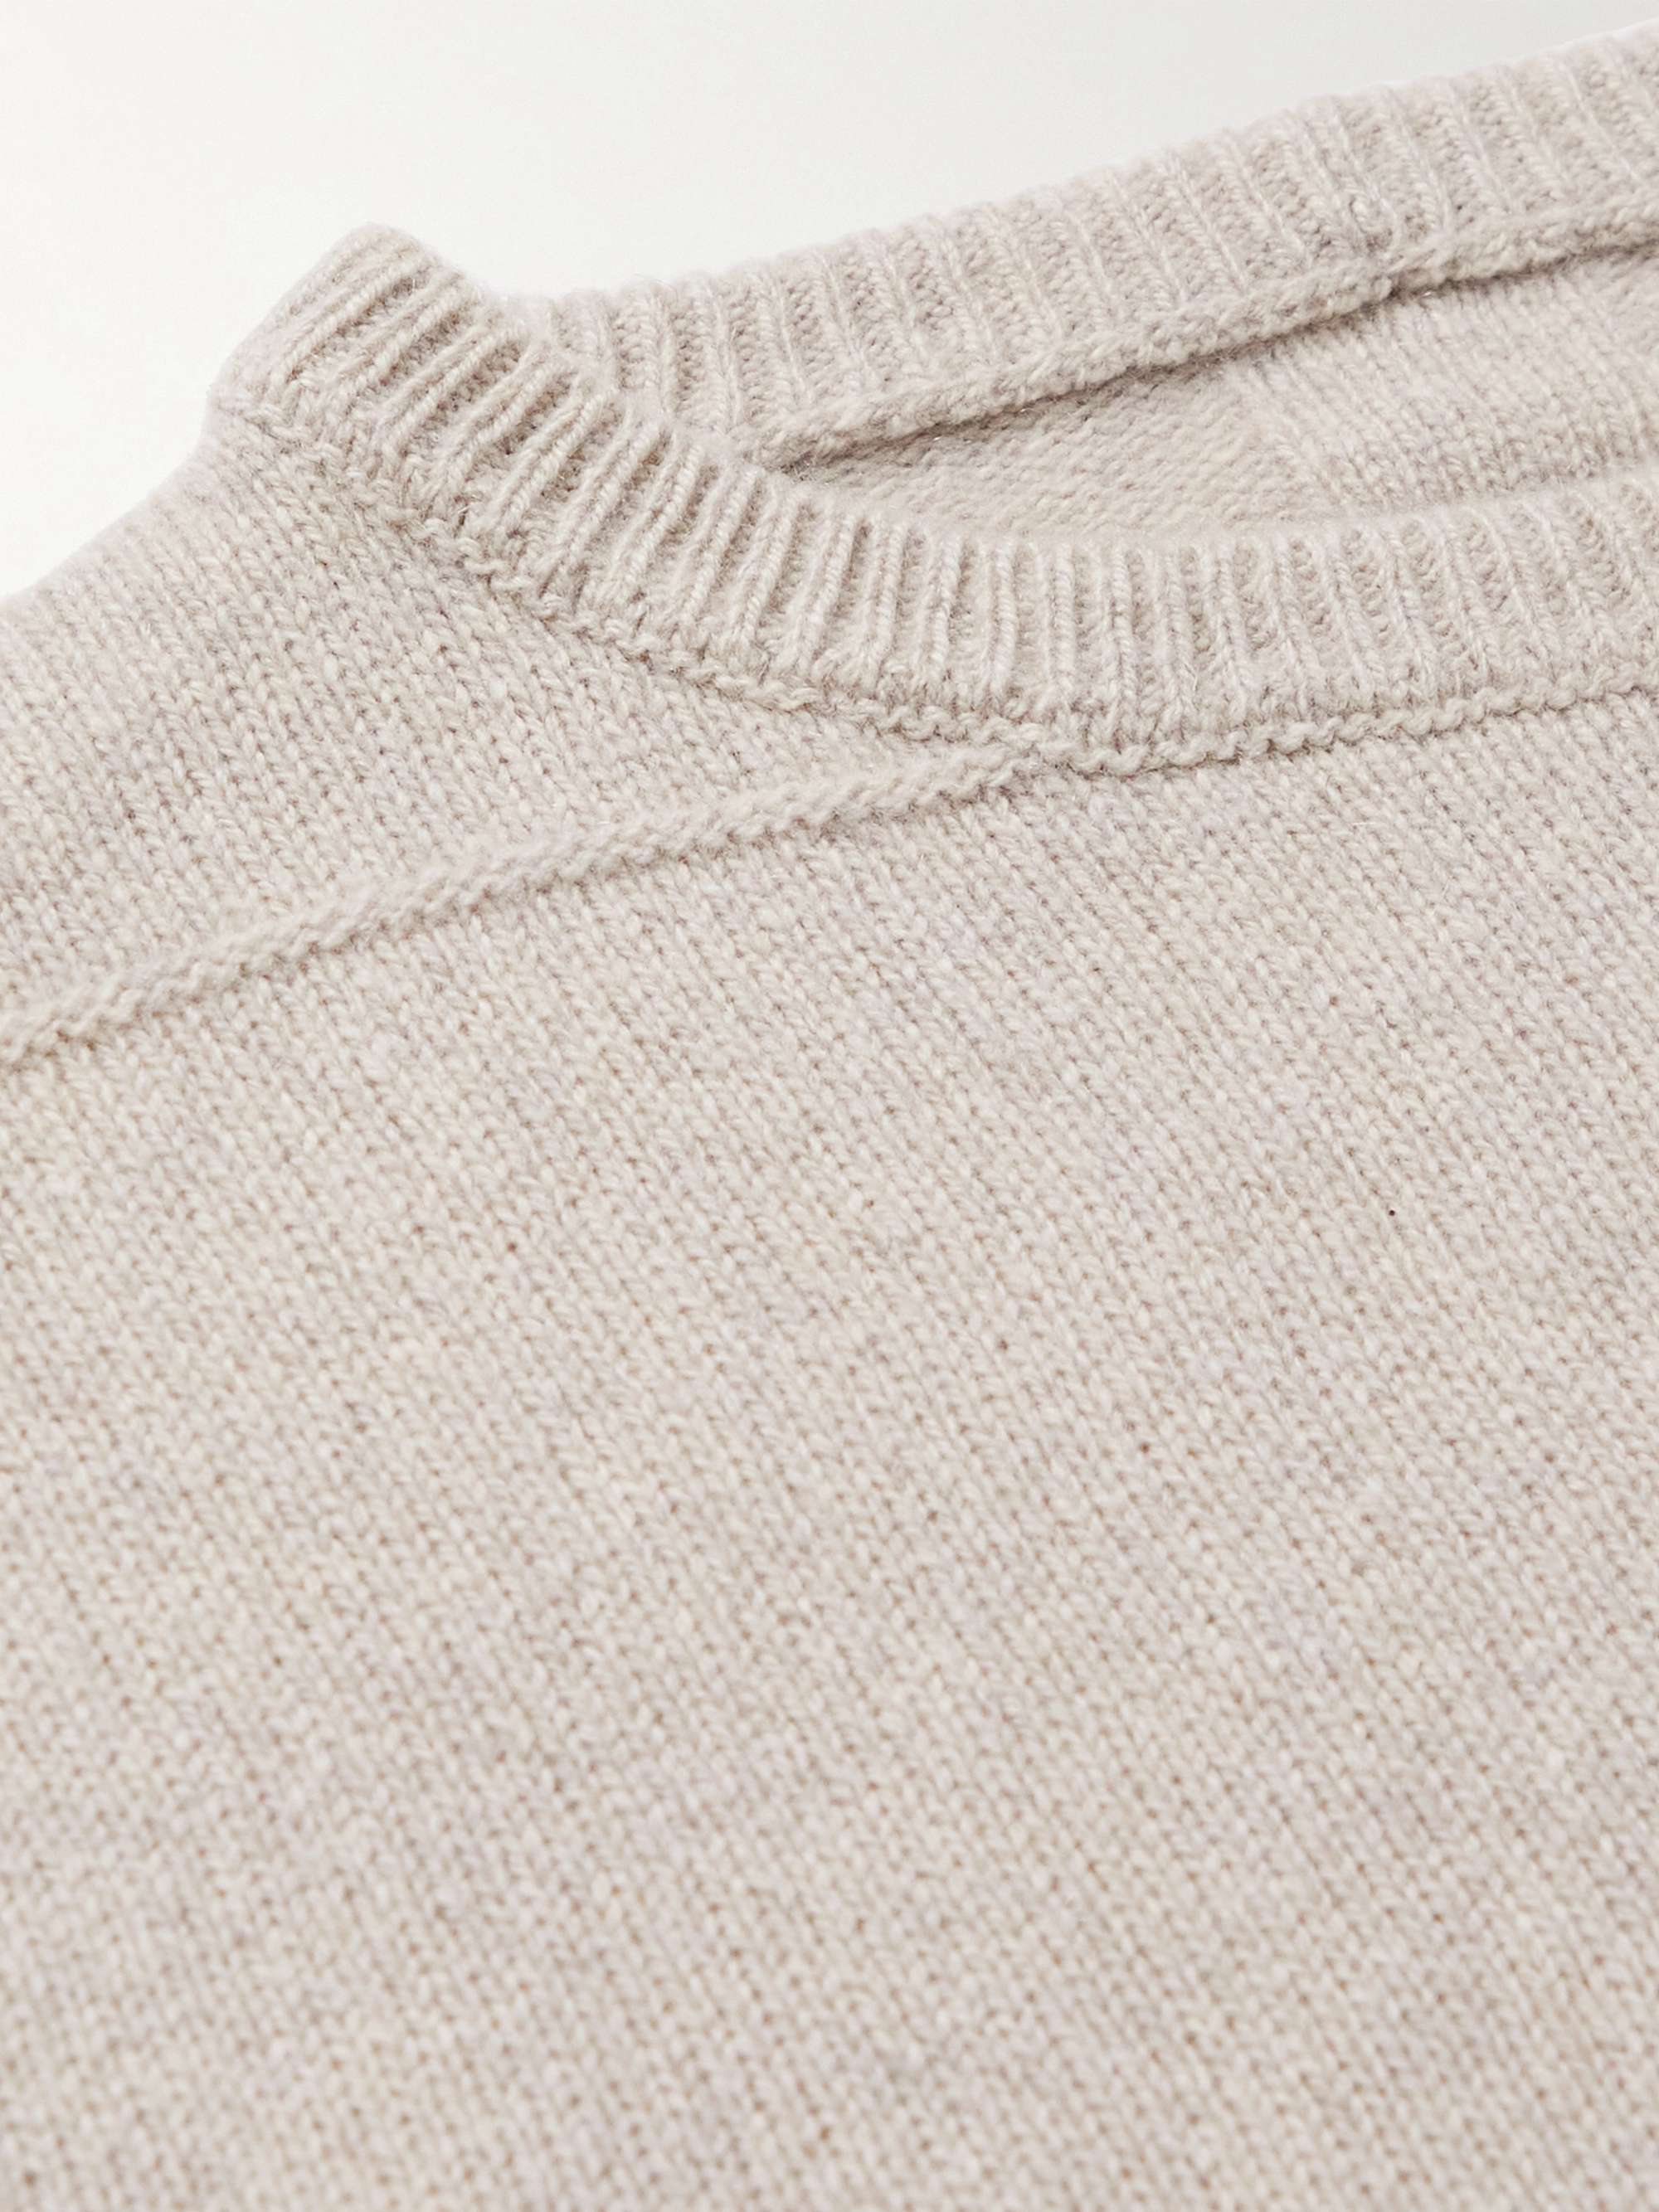 RICK OWENS Recycled Cashmere and Wool-Blend Sweater